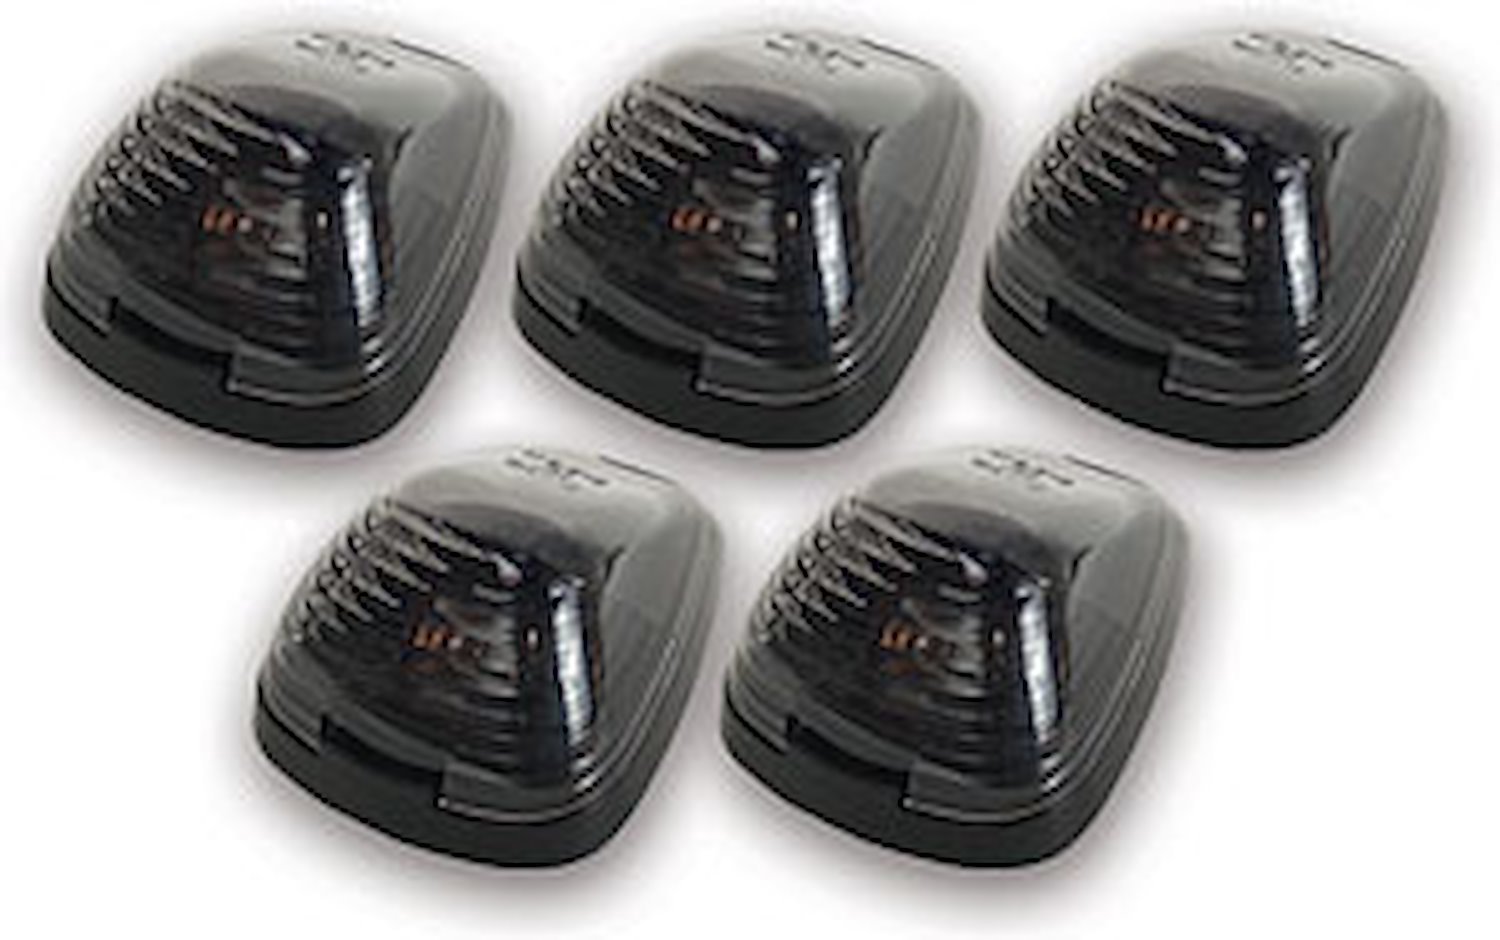 O.E. Style Cab Roof Lights 1999-2013 Ford Super Duty Pickups